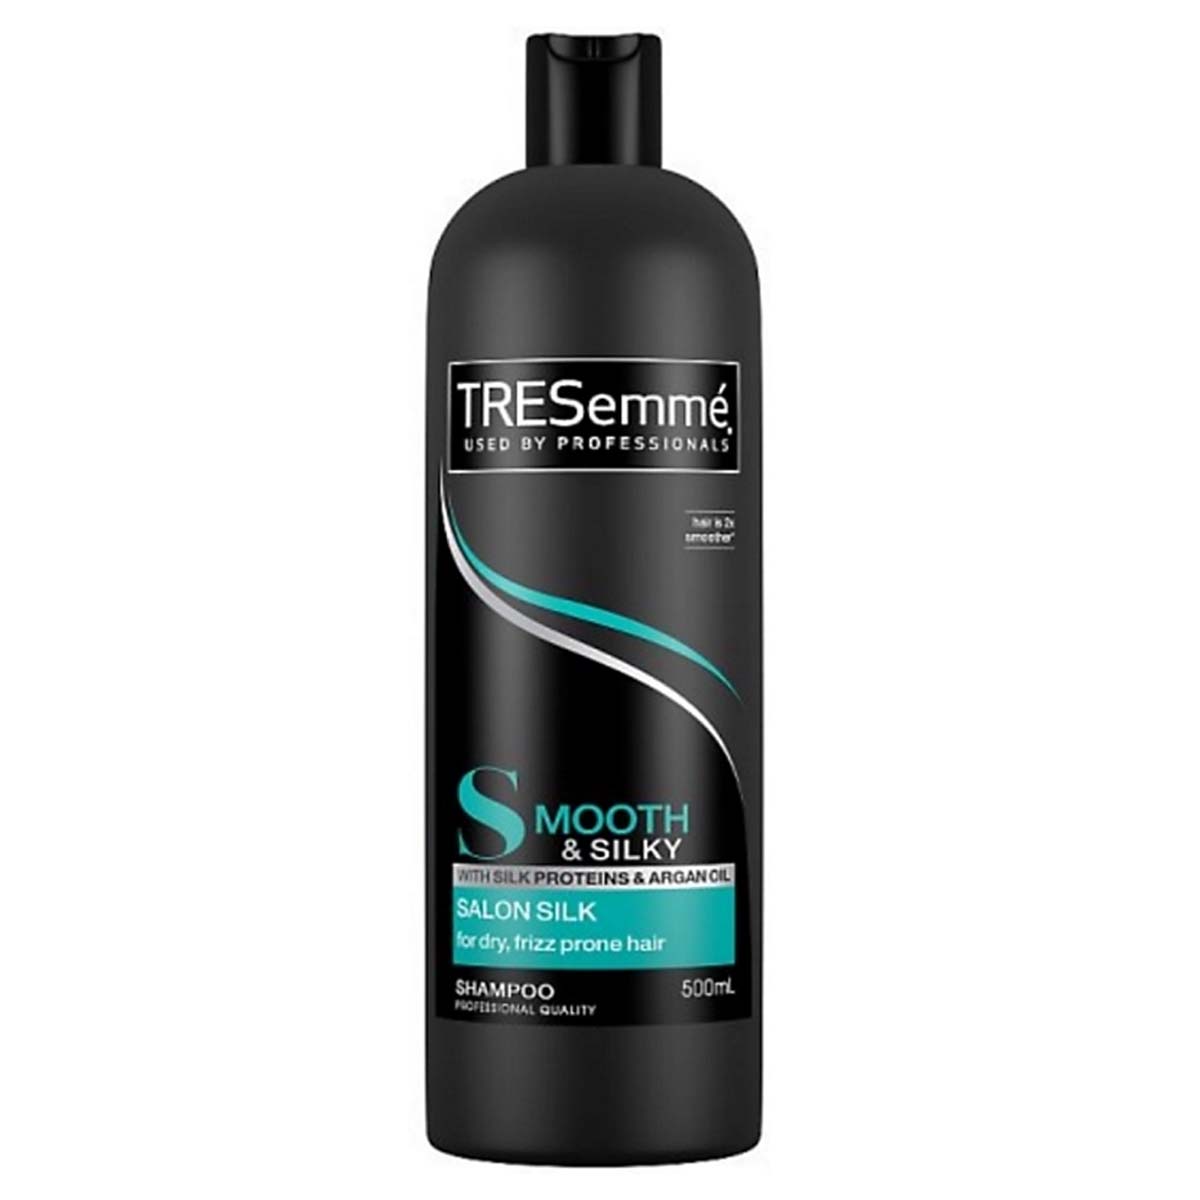 TreSemme - Smooth & Silky Shampoo - 500ml - Continental Food Store